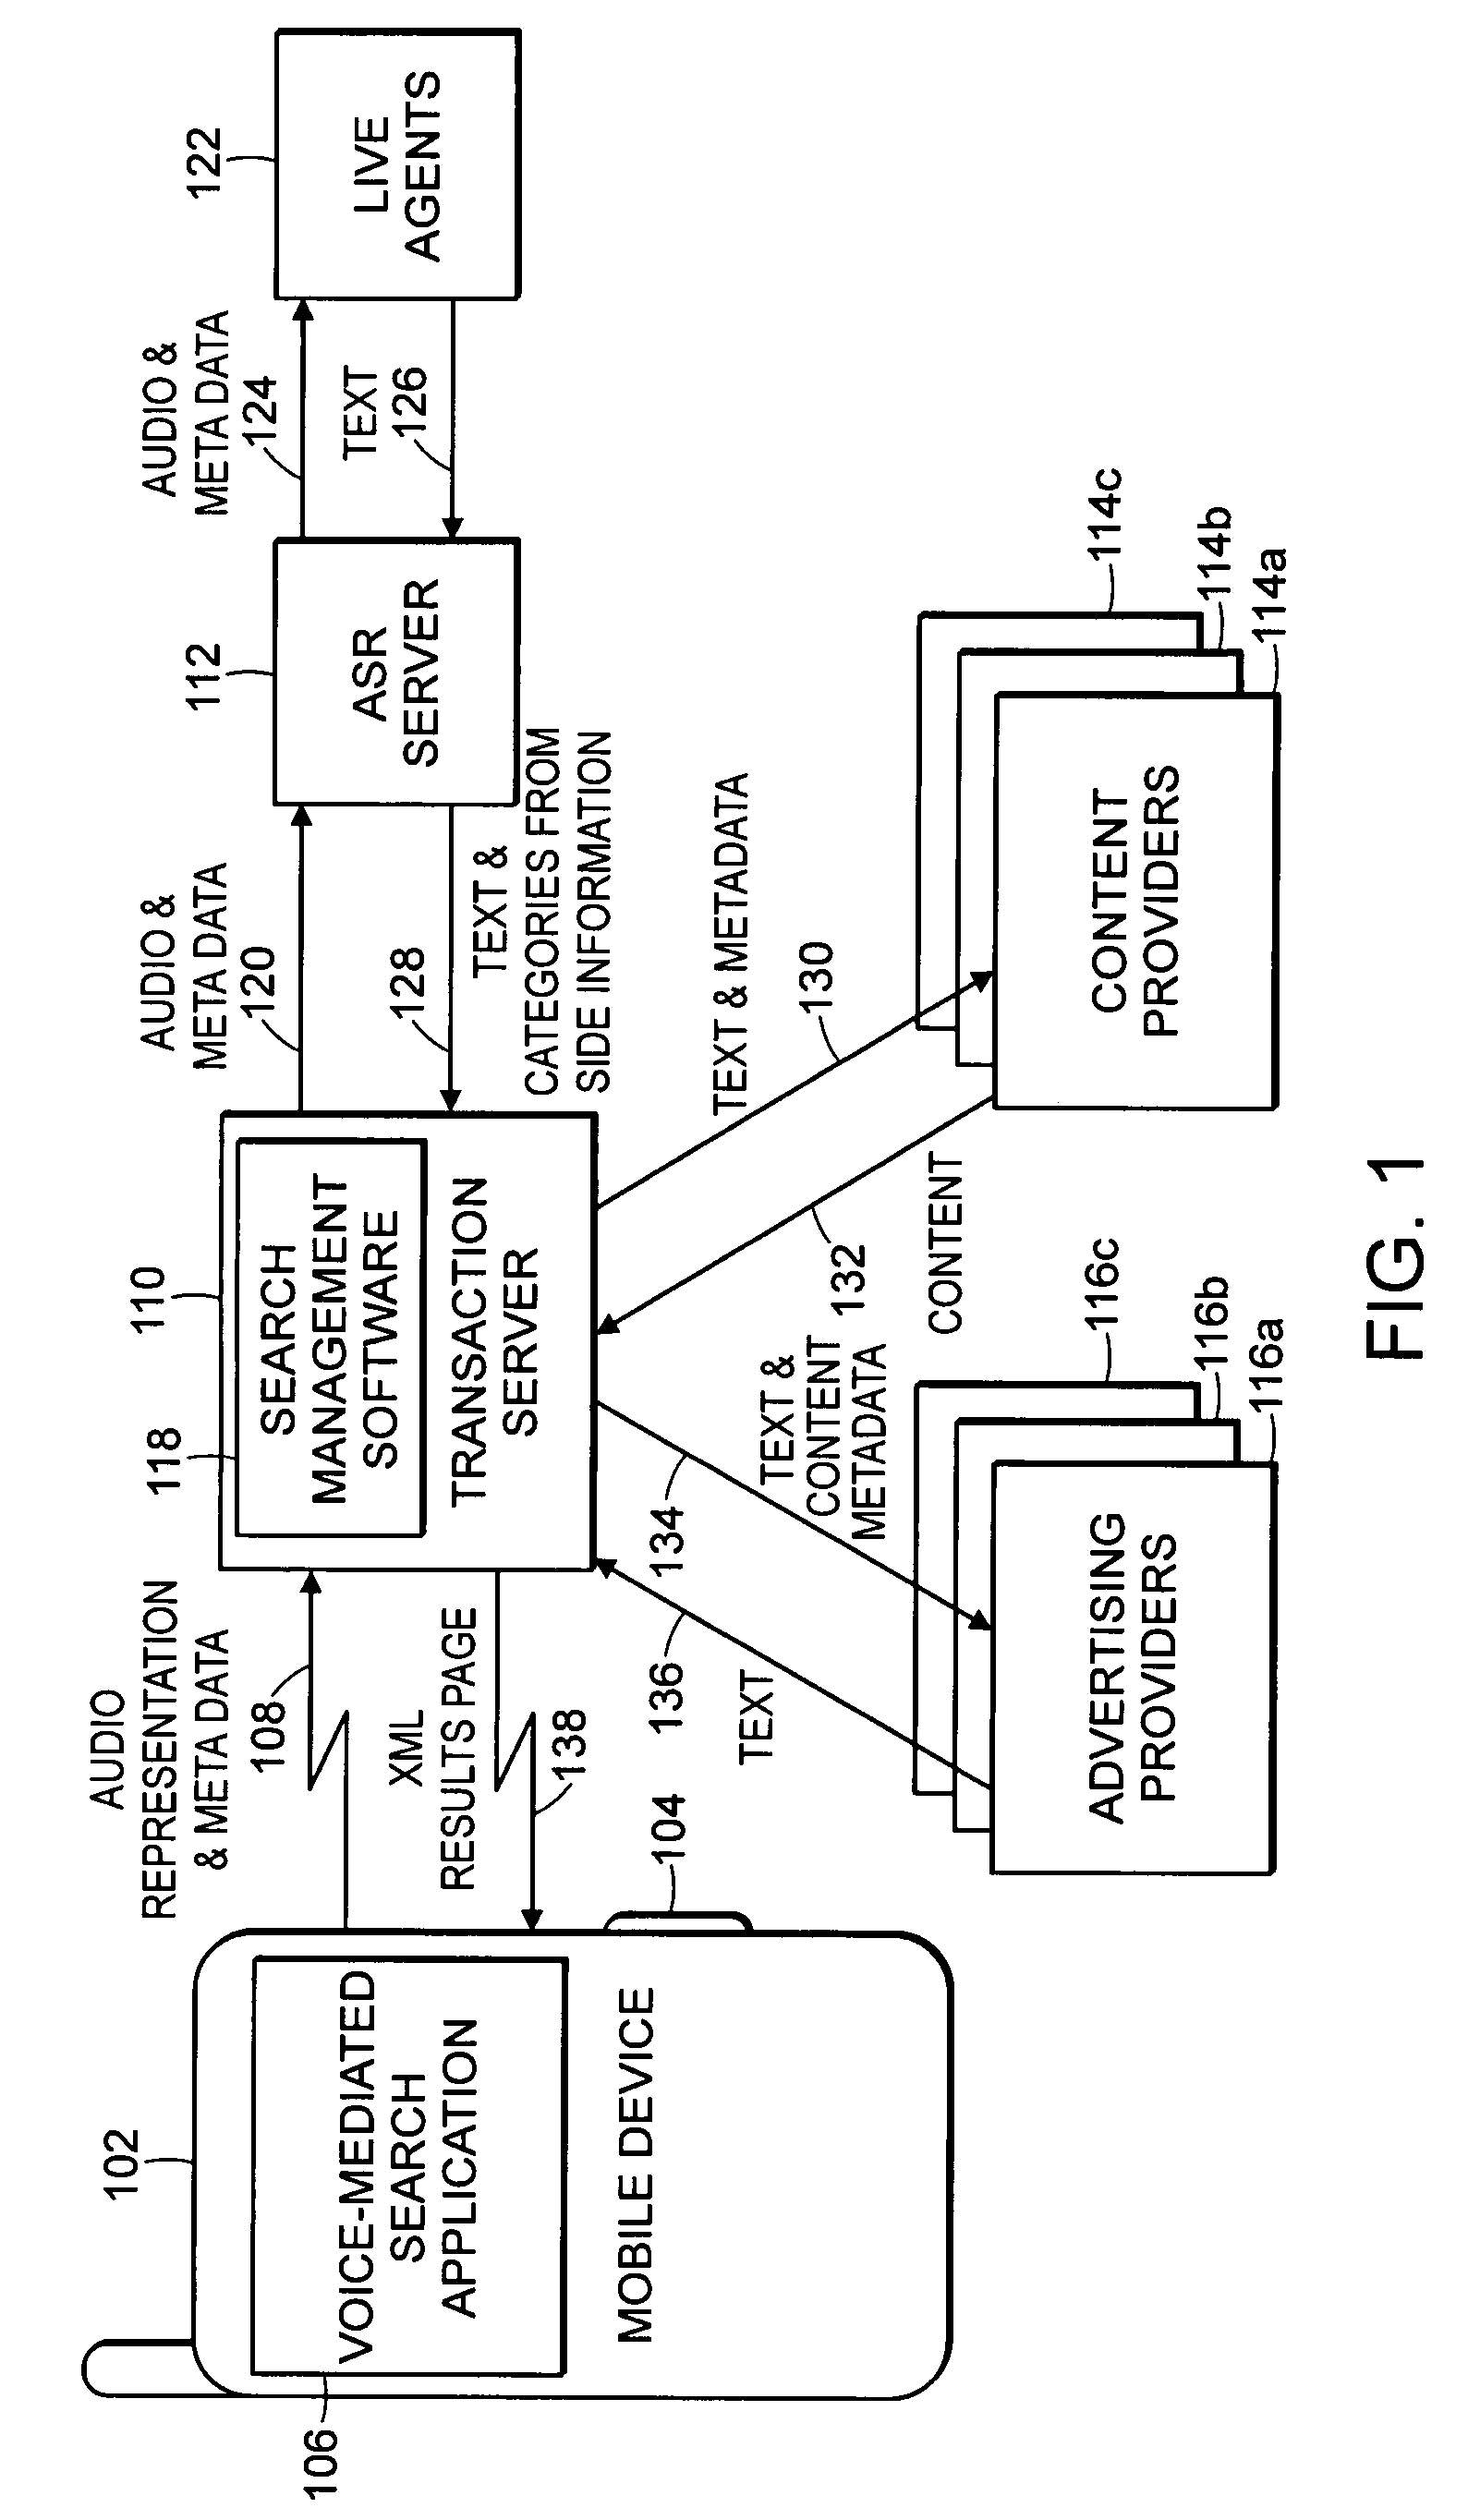 Collection and use of side information in voice-mediated mobile search